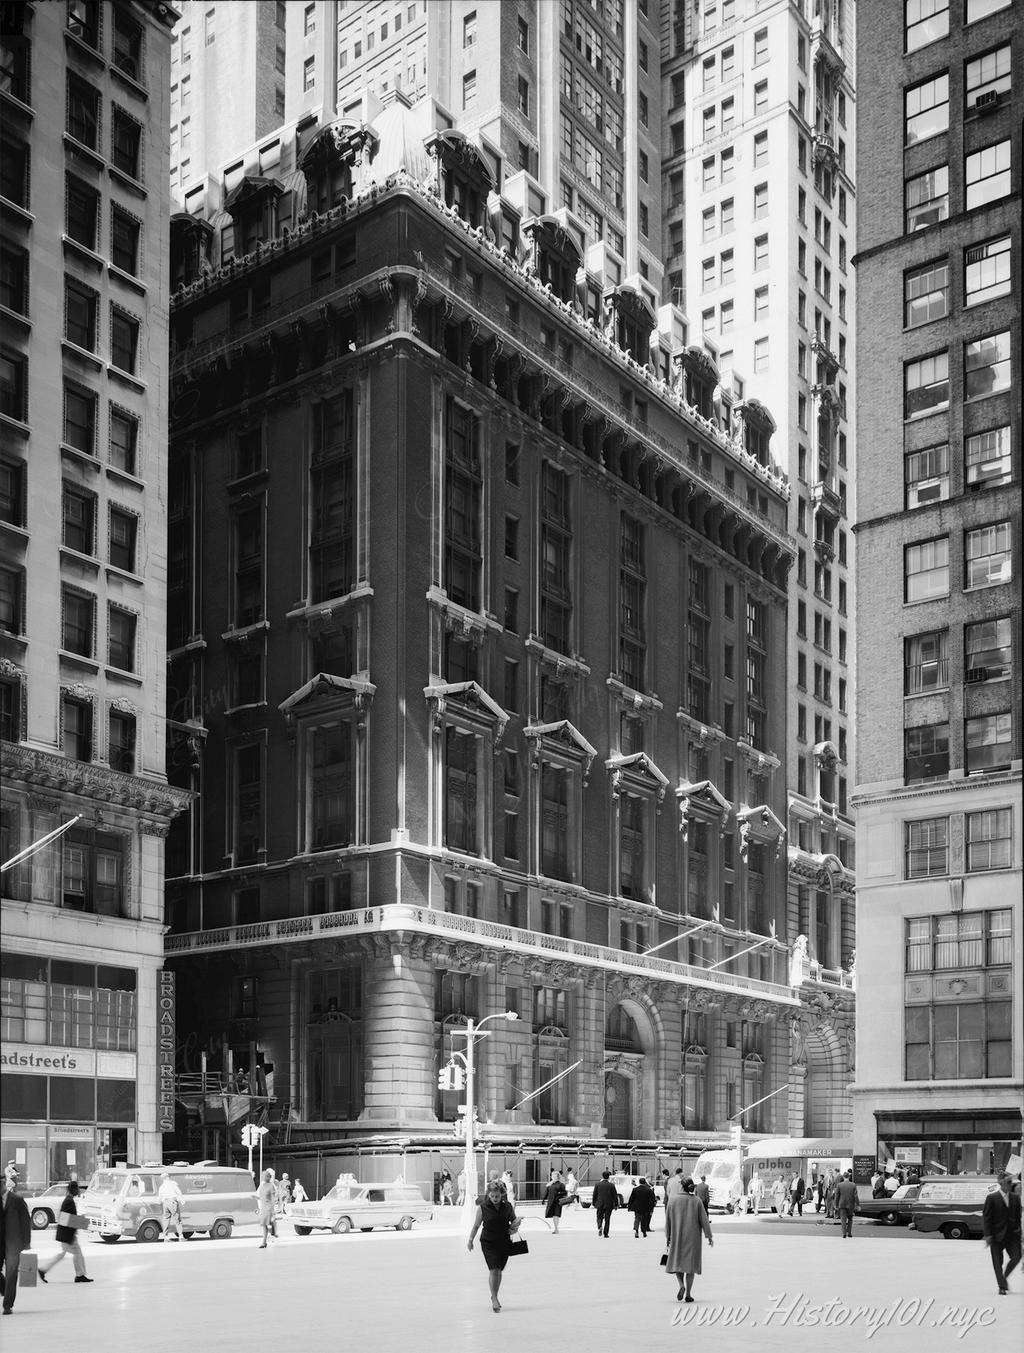 Photograph of 149 Broadway, The Singer Building Facade from the southeast.